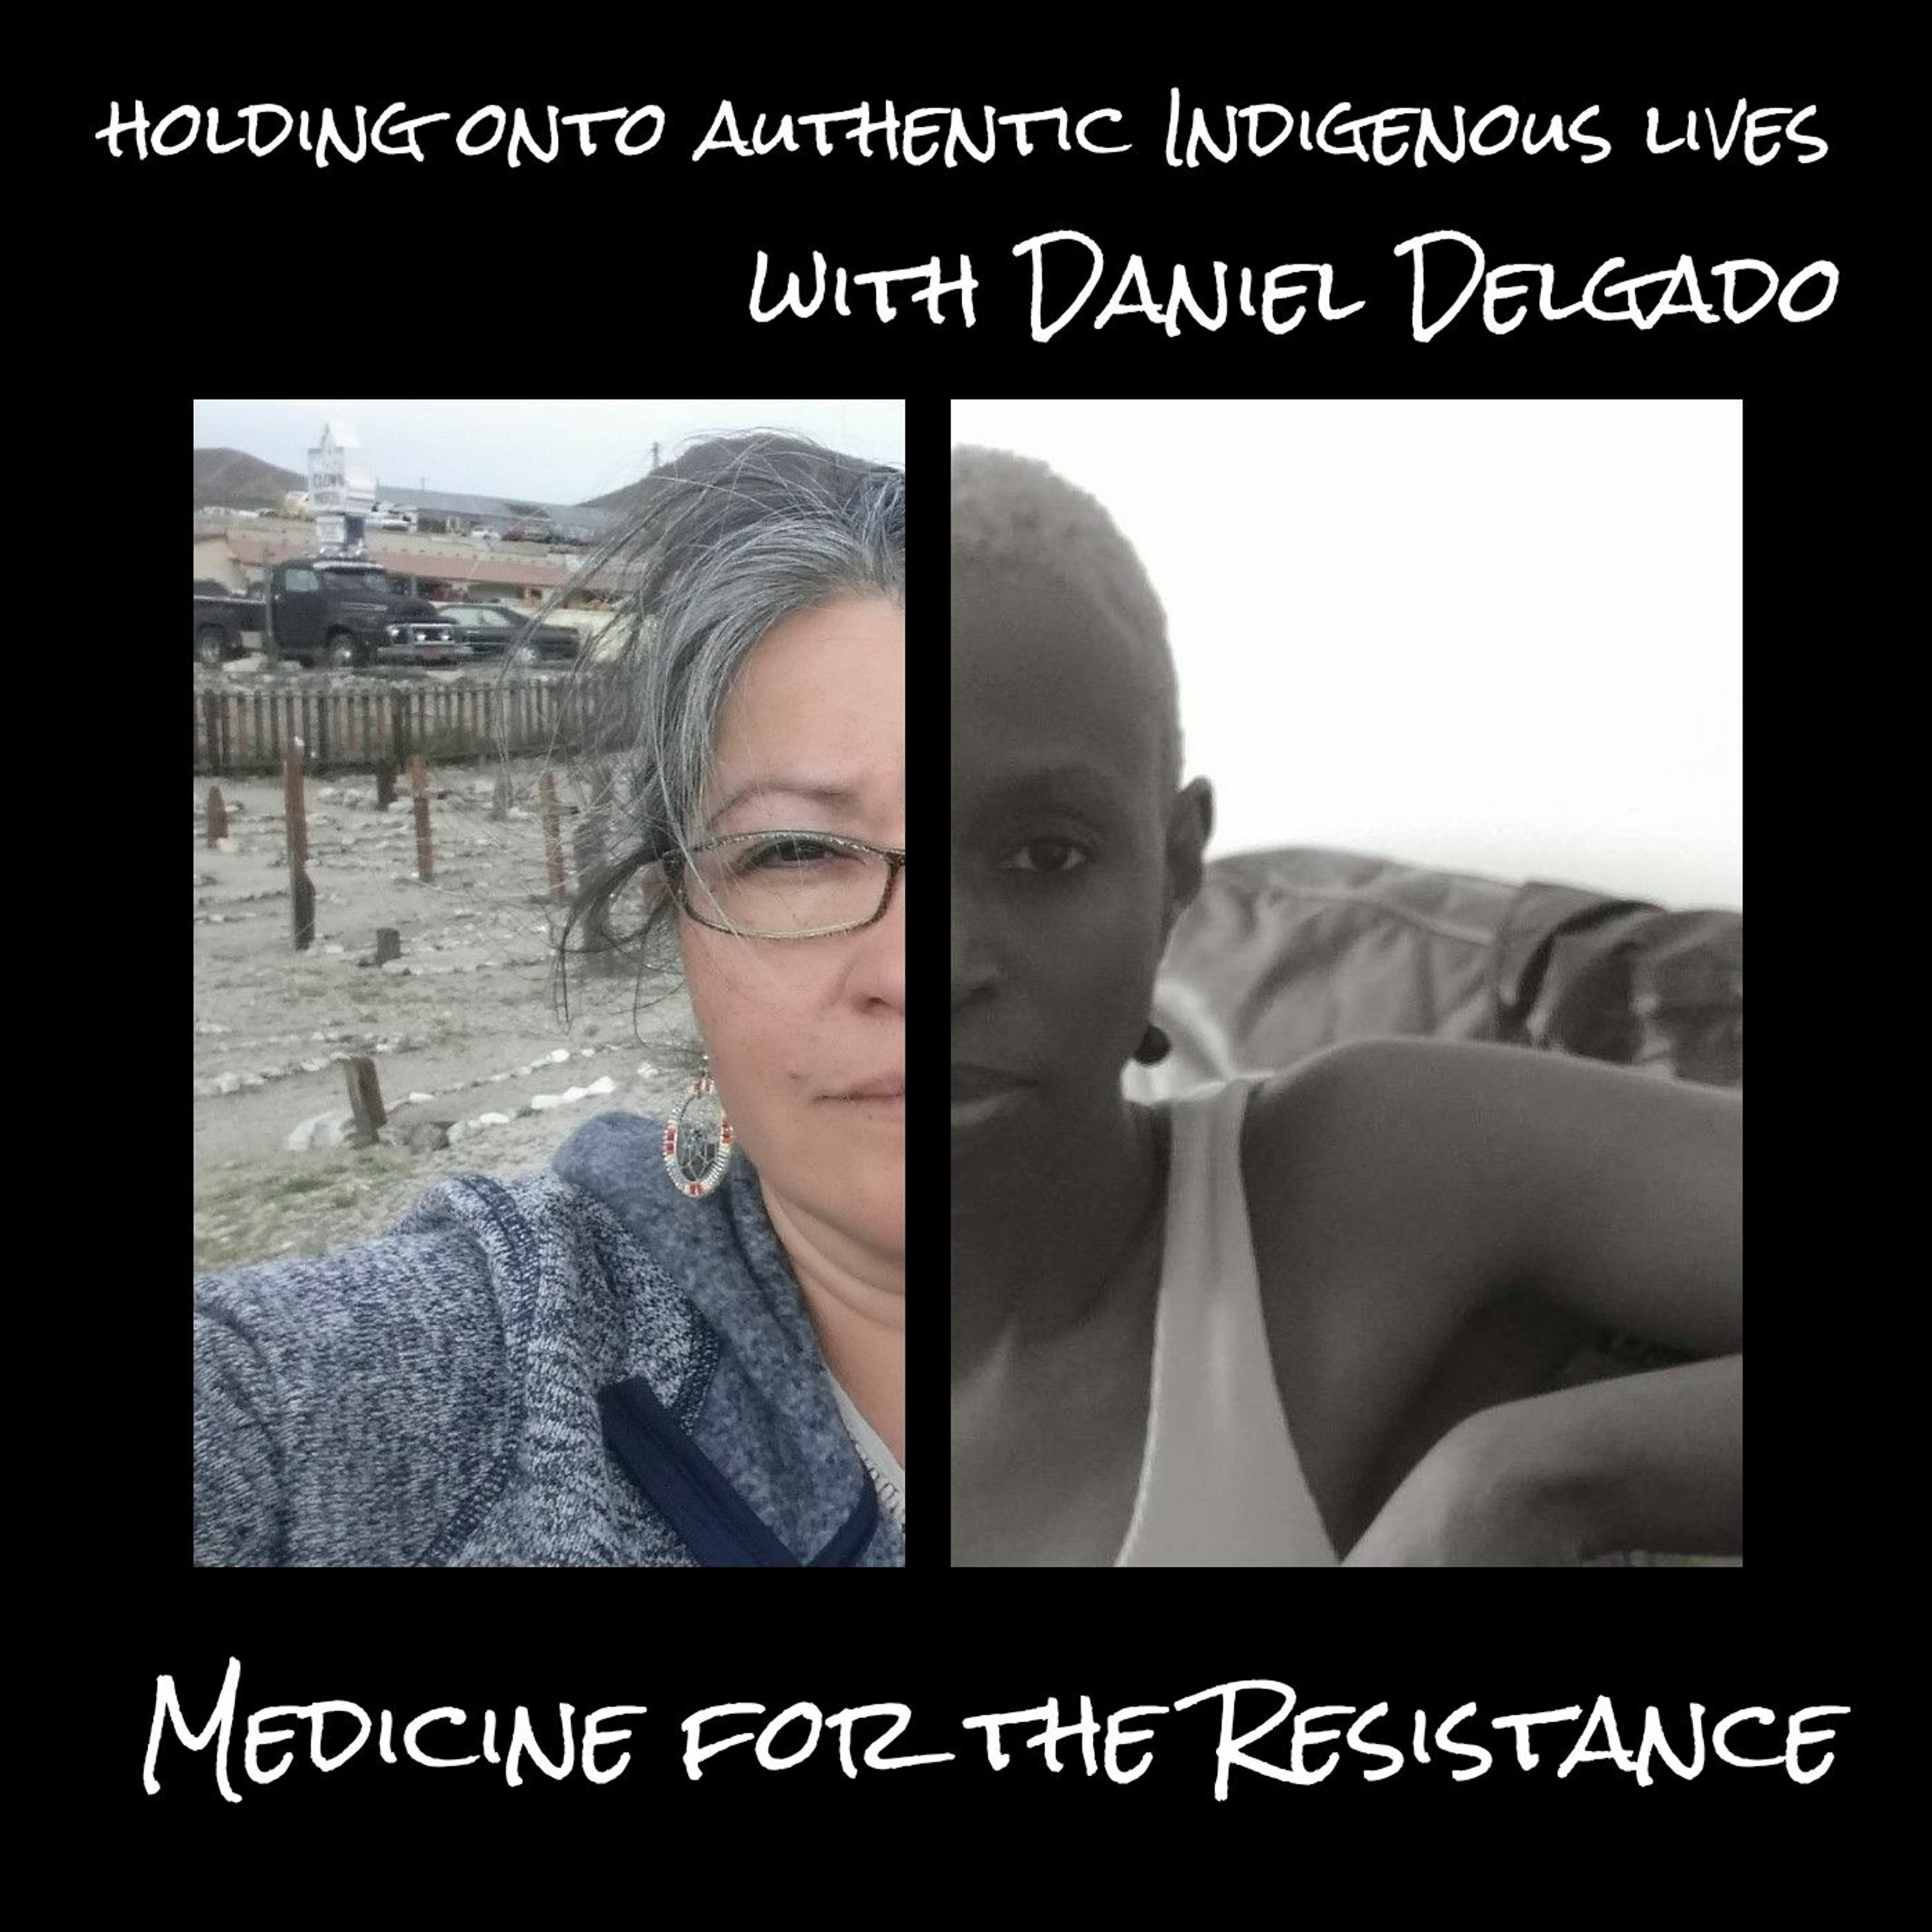 Holding onto authentic Indigenous lives with Daniel Delgado